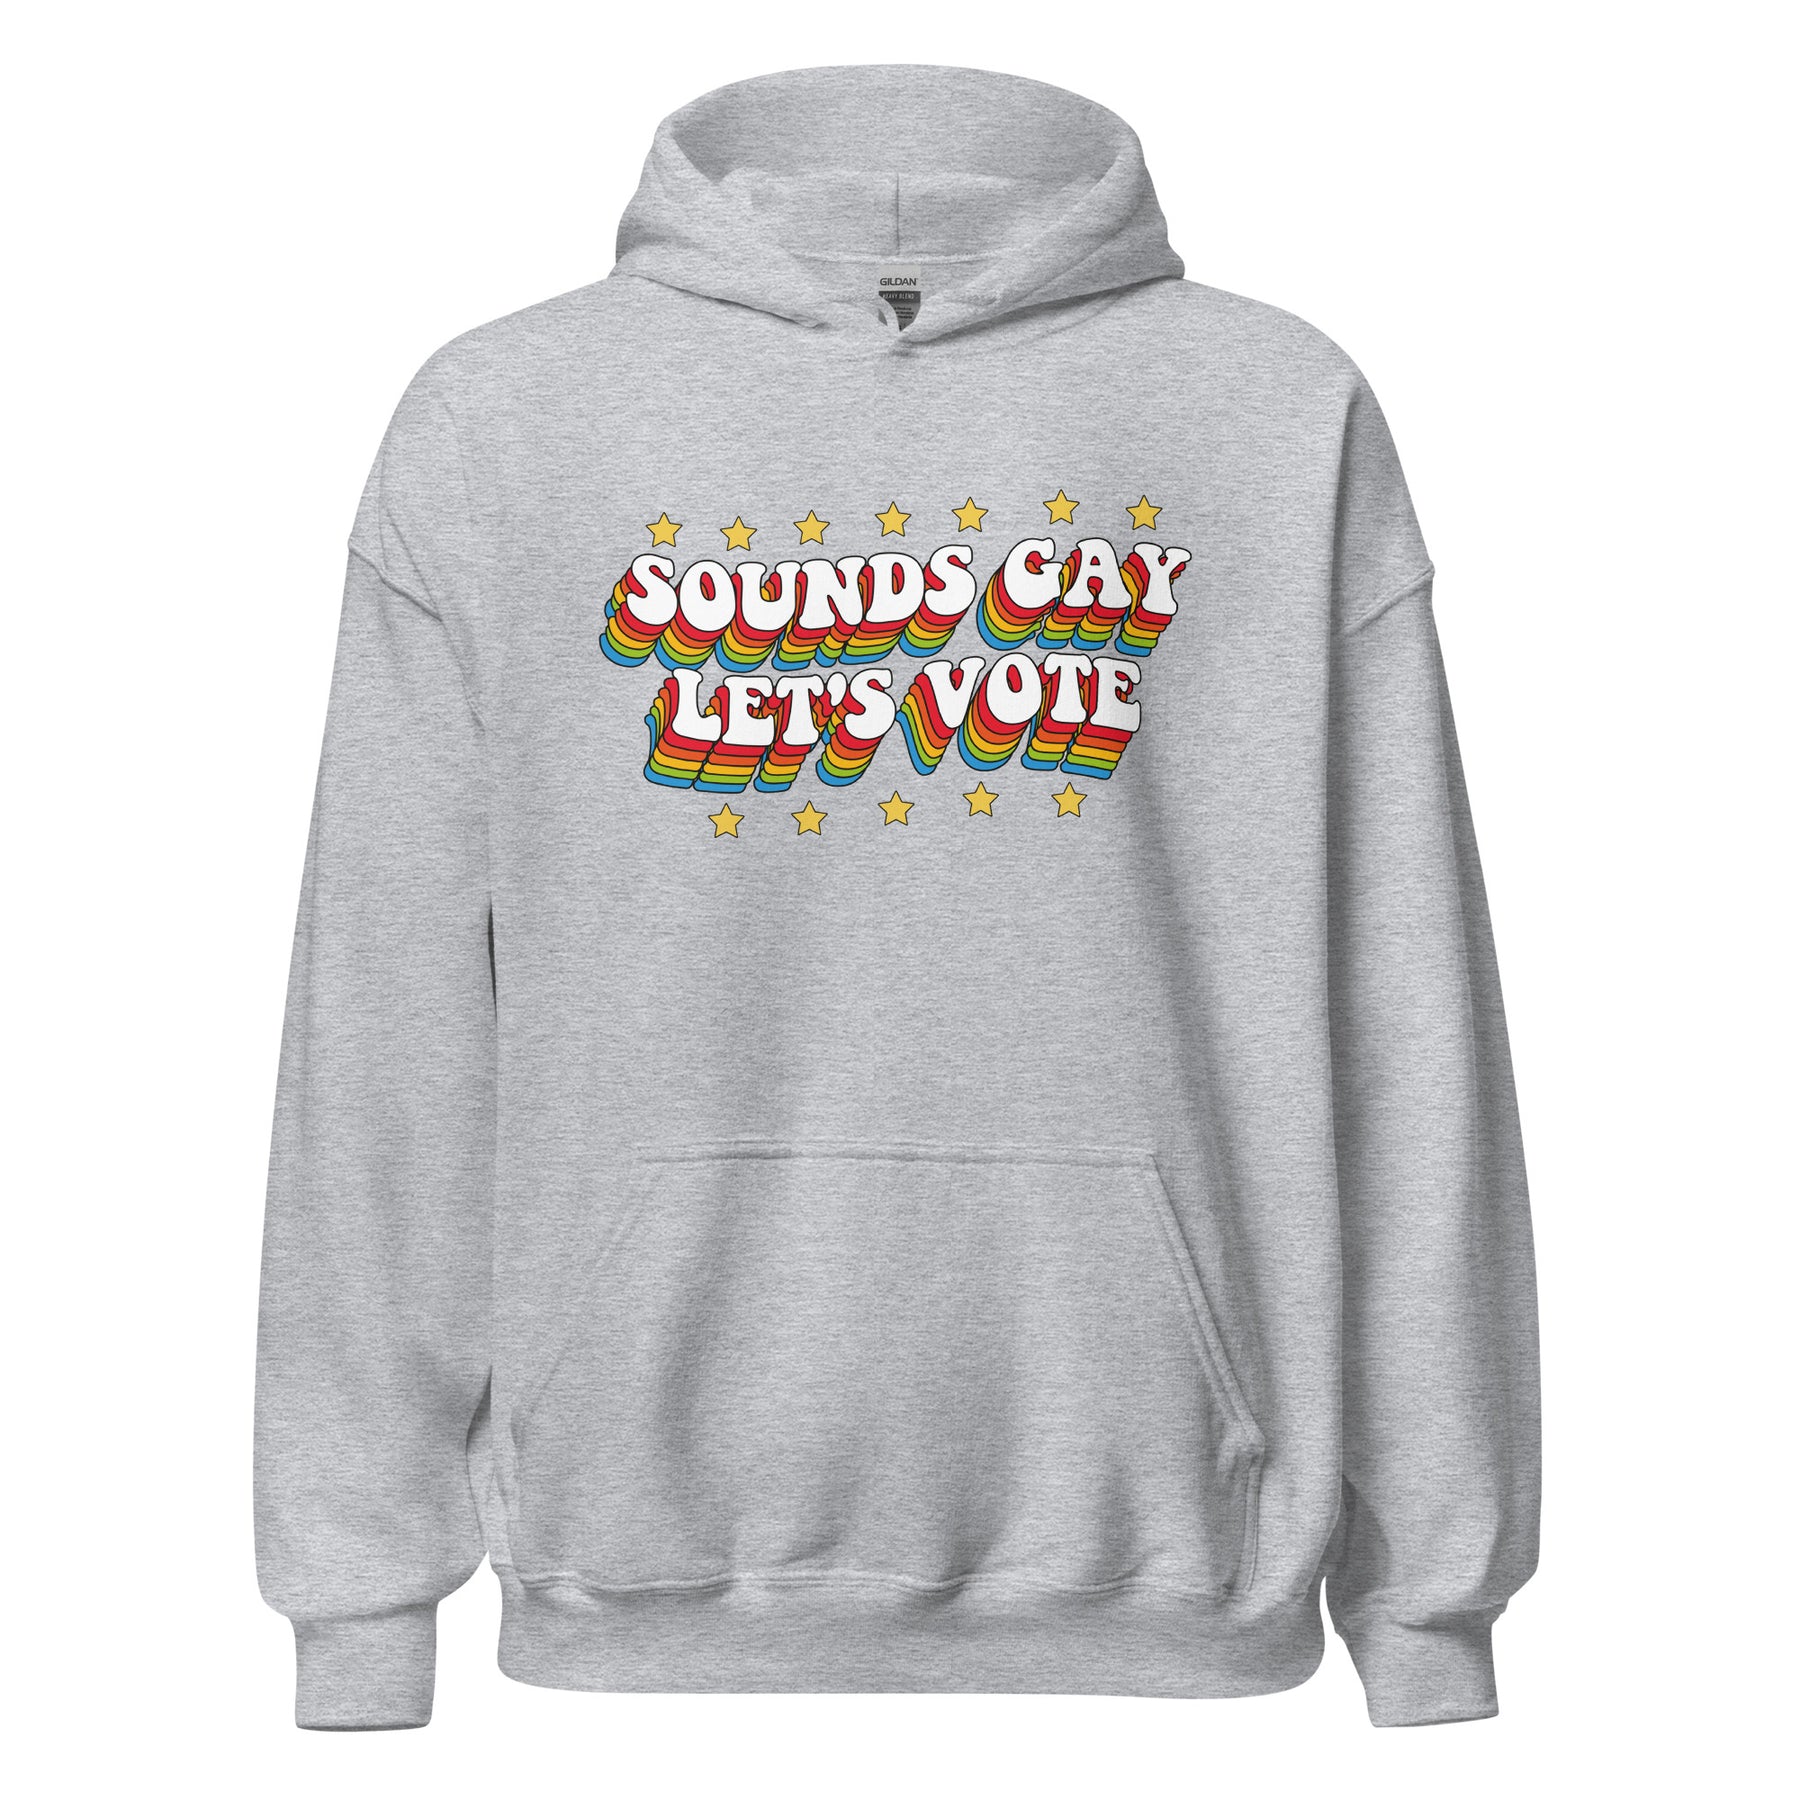 Sounds Gay Let's Vote Hoodie